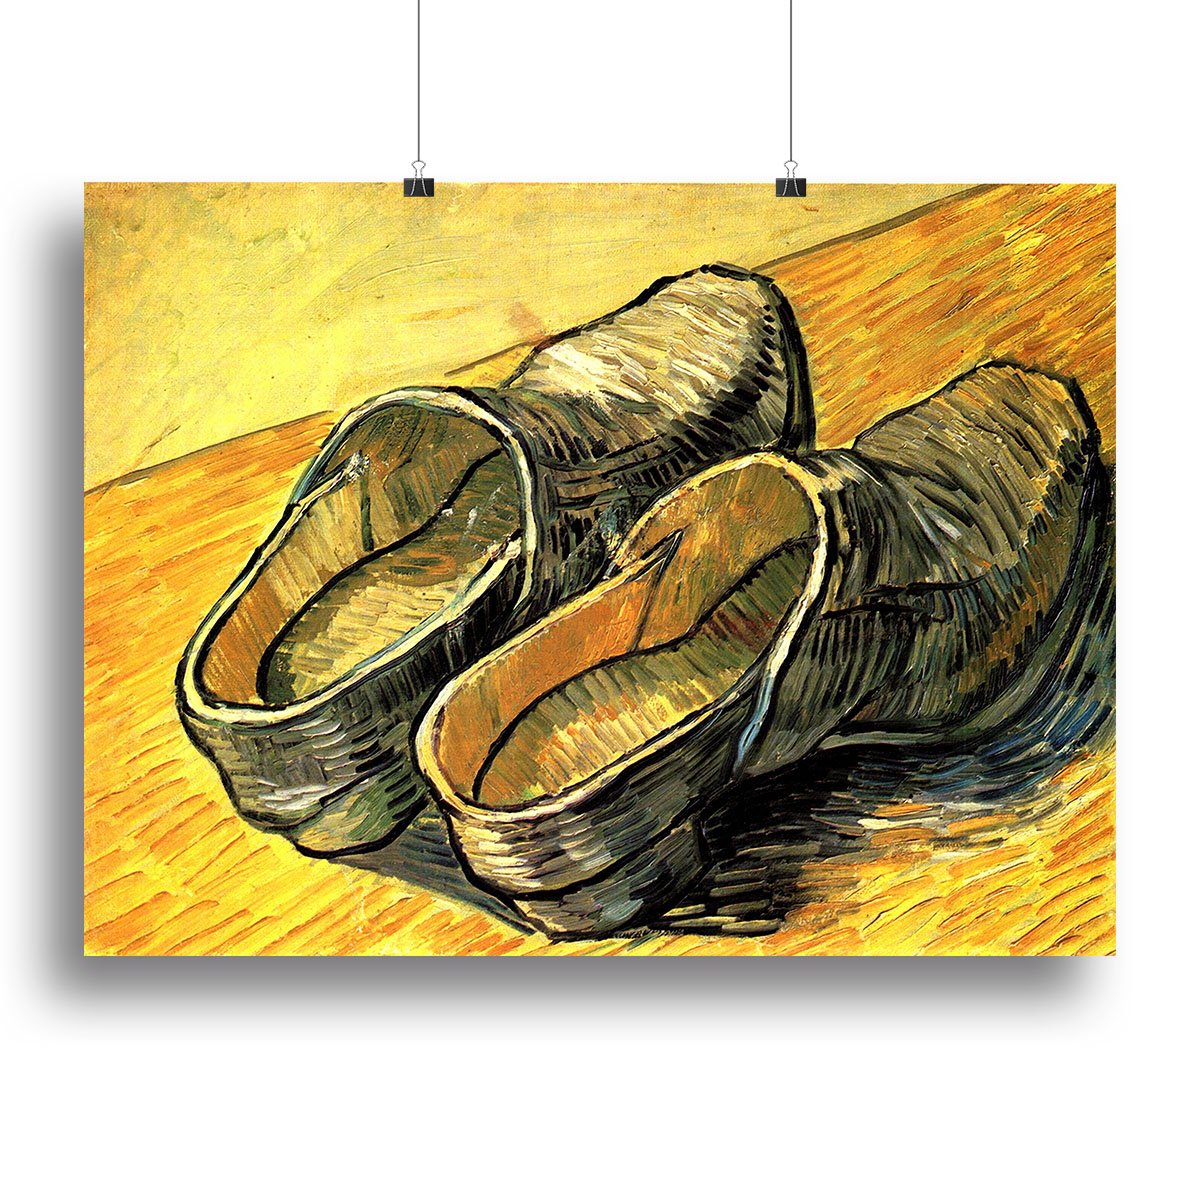 A Pair of Leather Clogs by Van Gogh Canvas Print or Poster